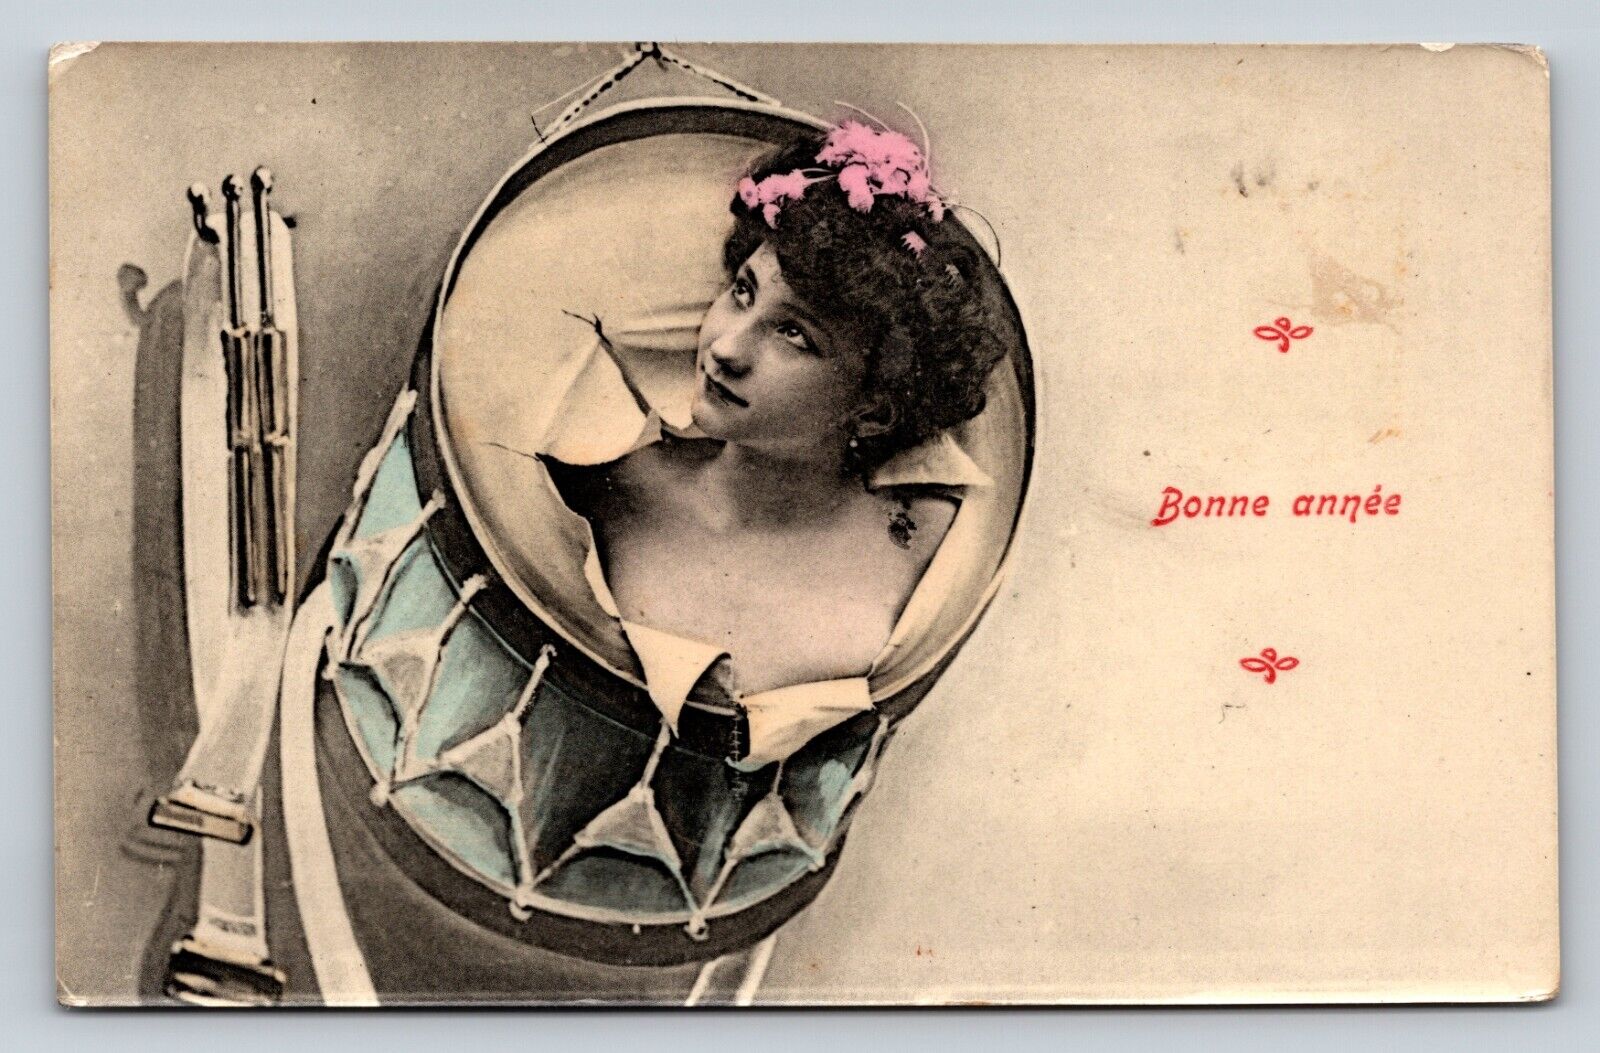 Bare Chest Woman Busts Out of Drum HAPPY NEW YEAR Bonne Année VINTAGE Postcard